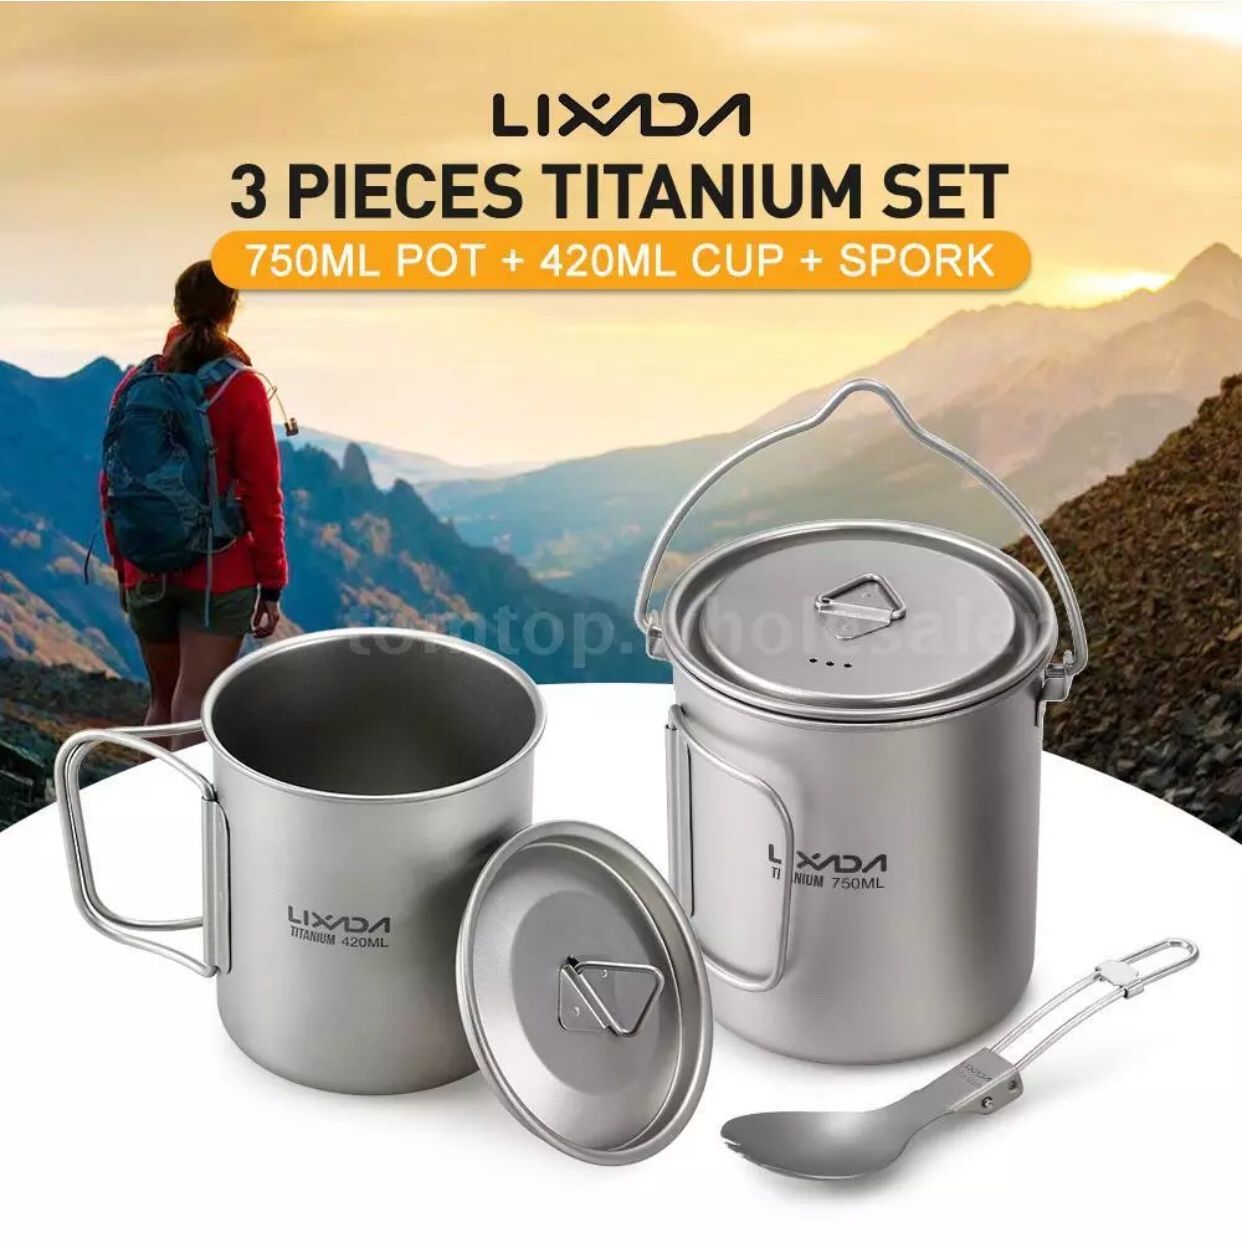 Lixada Titanium Cup/Pot/Spoon for Outdoor Camping Picnic Hiking Backpacking D9X0